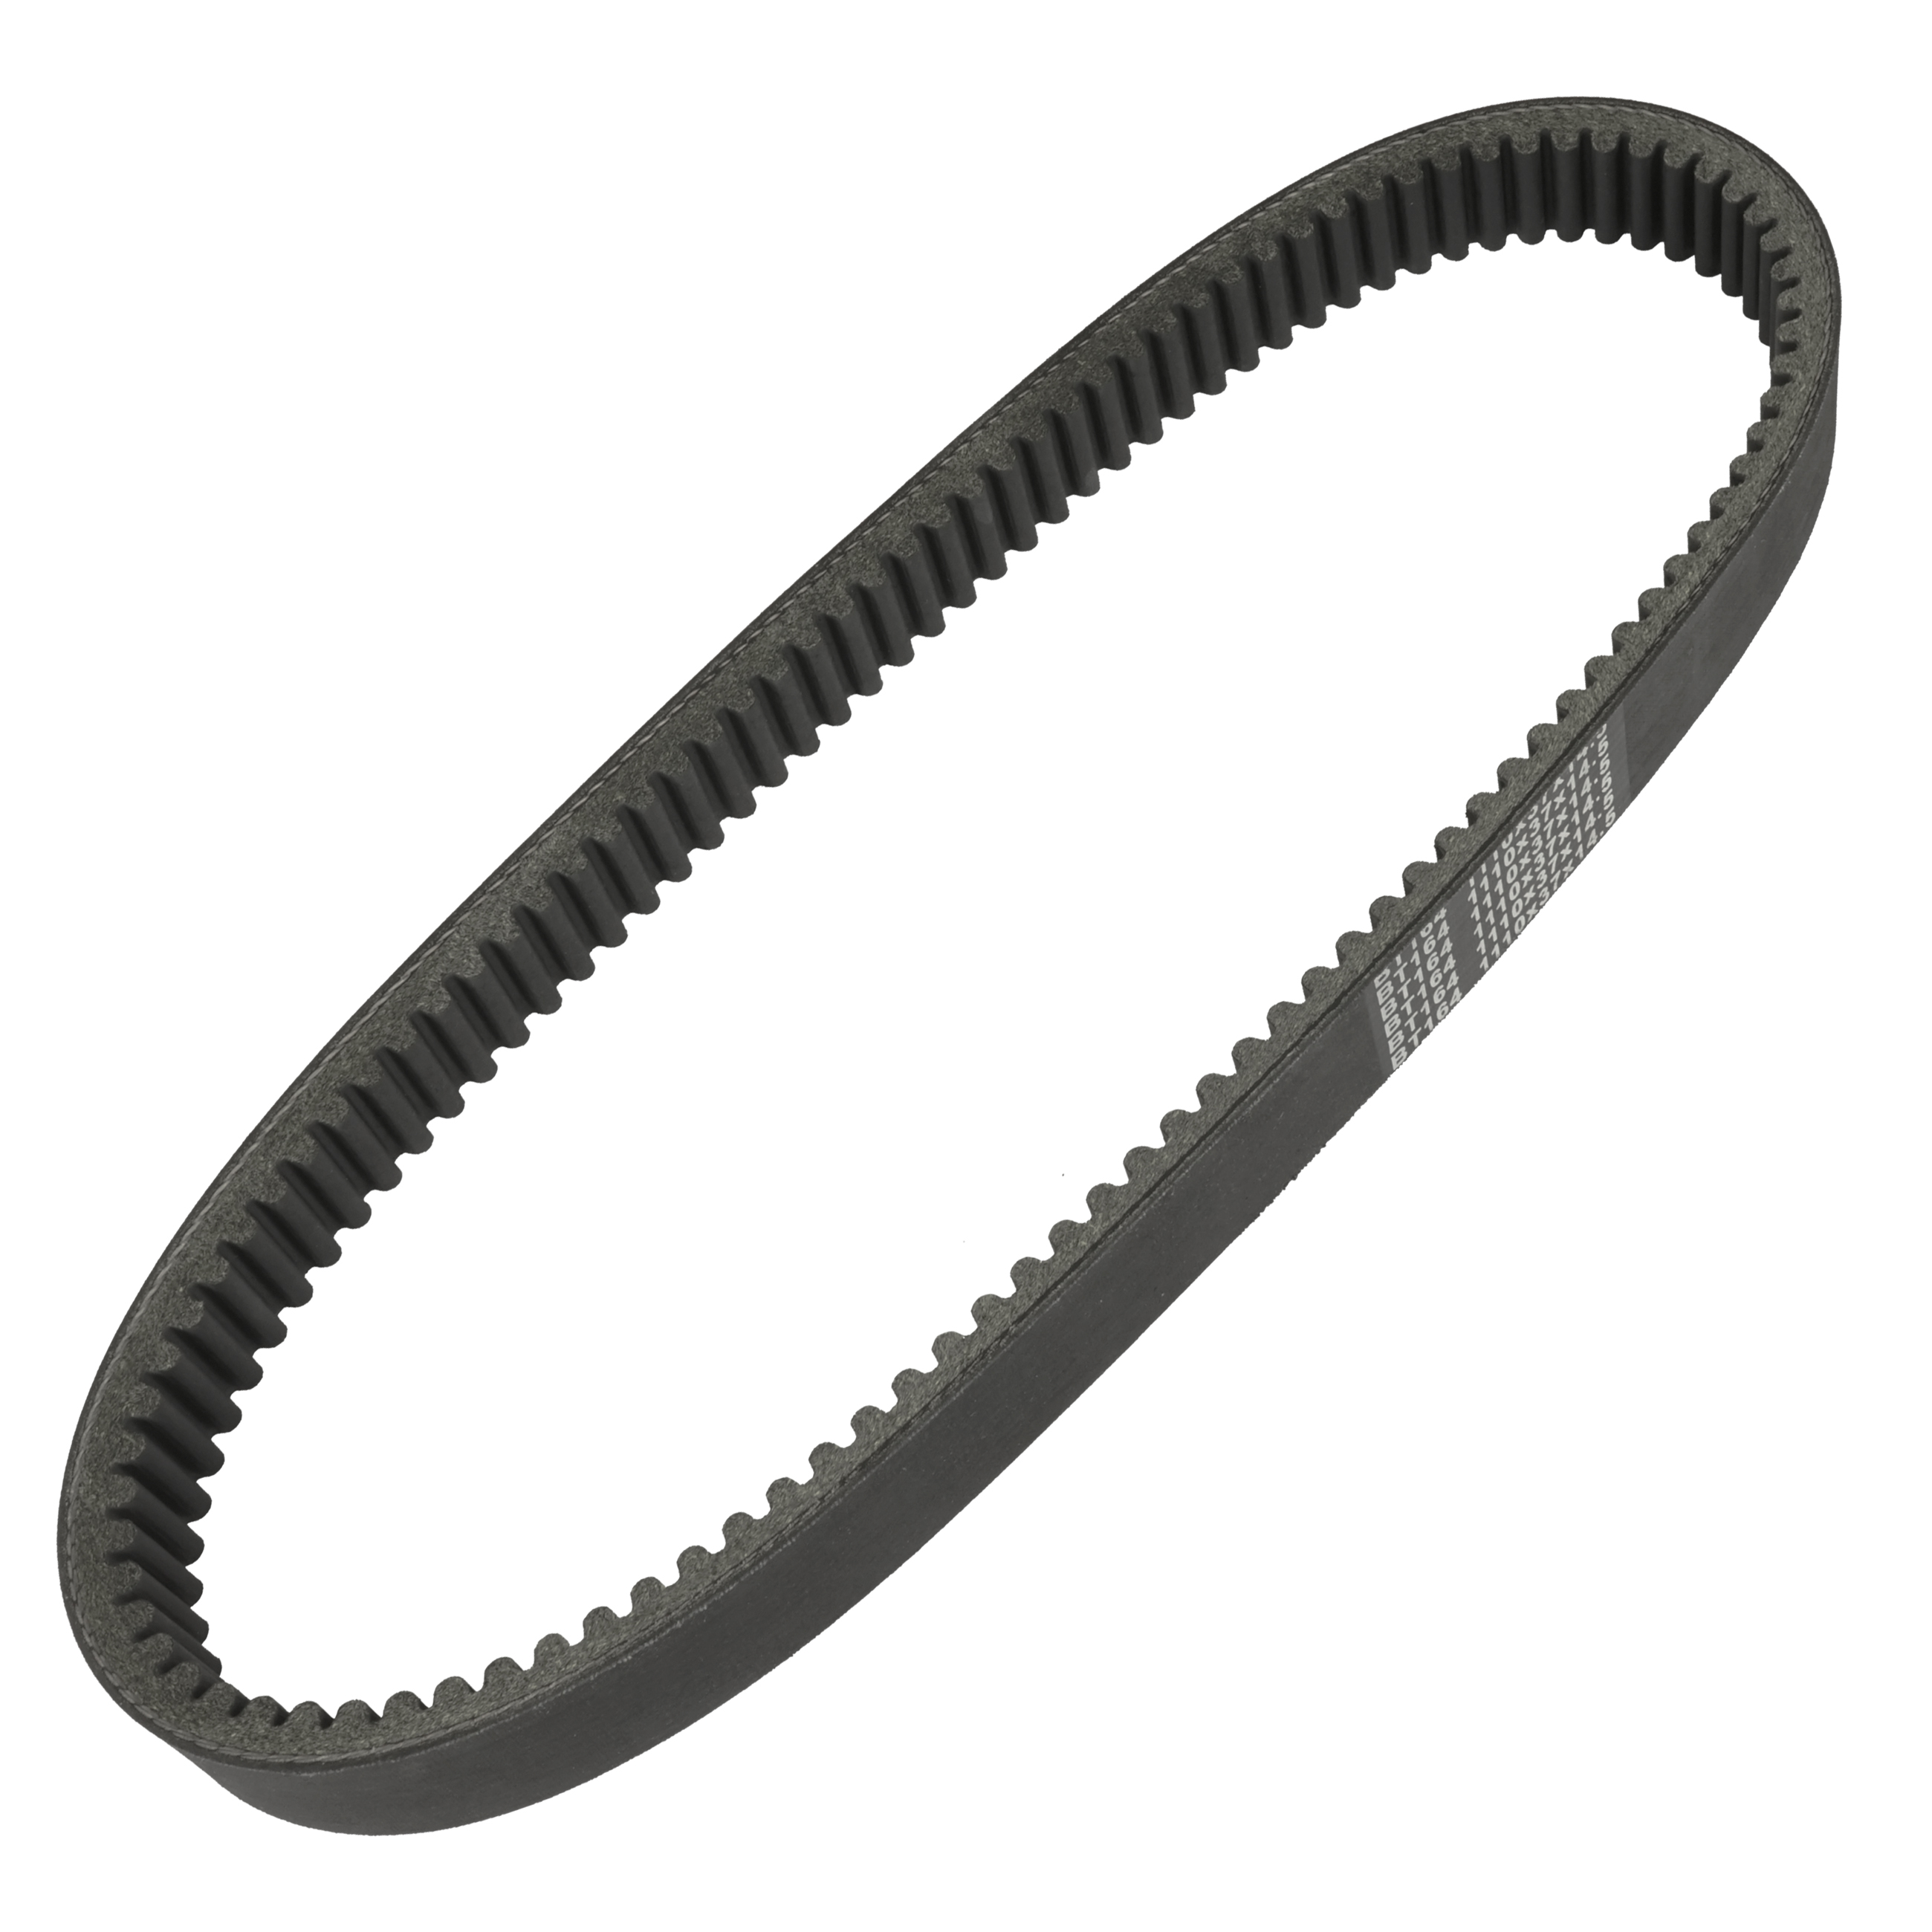 Replacement for Bombardier Ski-Doo # 417300197 Gates Snowmobile Drive Belt